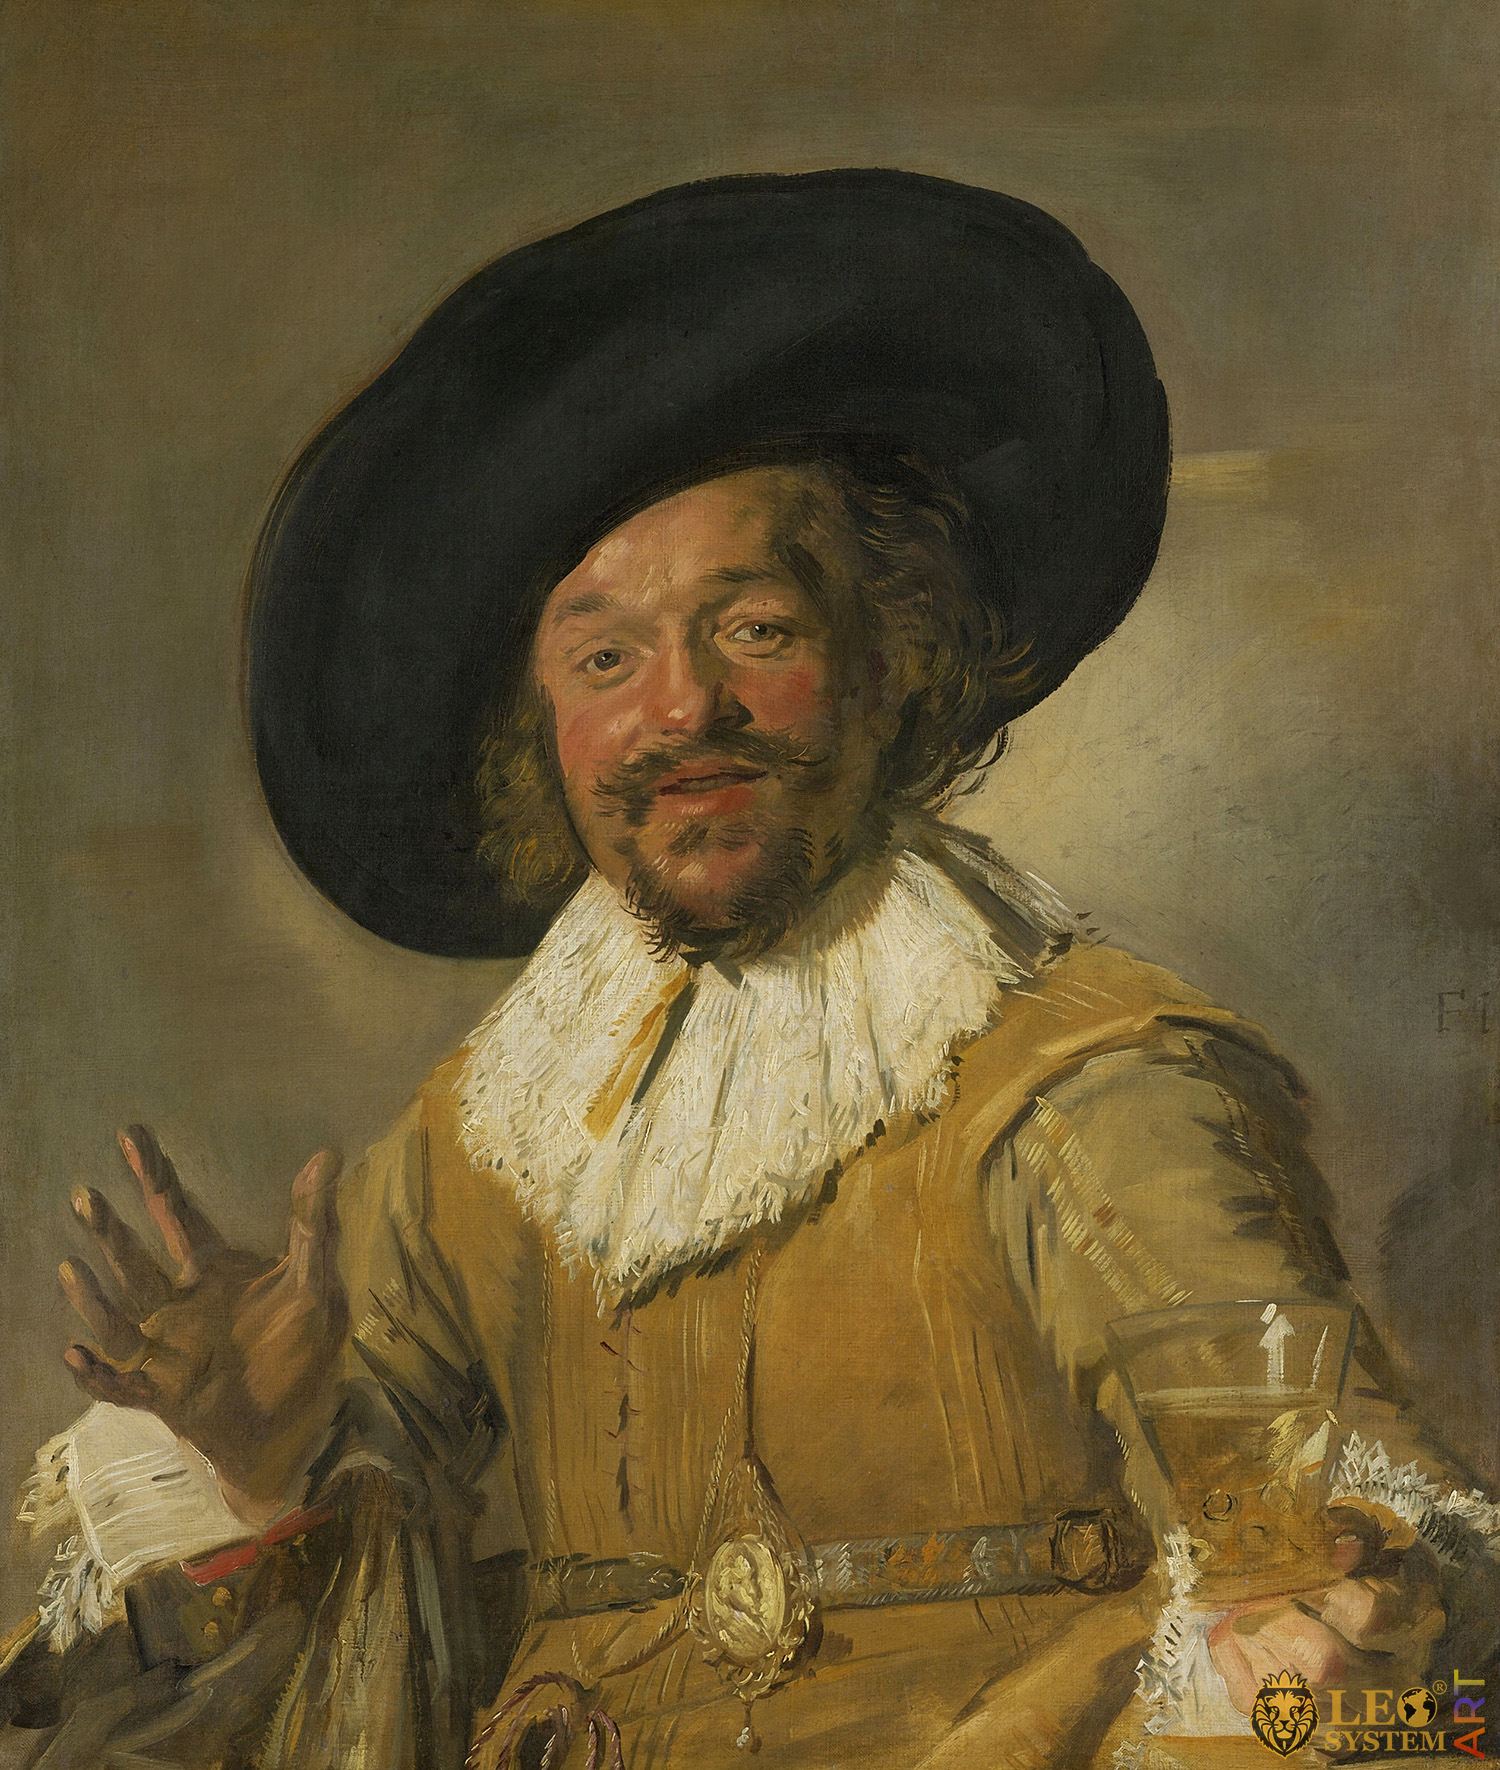 A Militiaman Holding a Berkemeyer, Known as the ‘Merry Drinker’, Painter: Frans Hals, 1628-1630, Original Painting